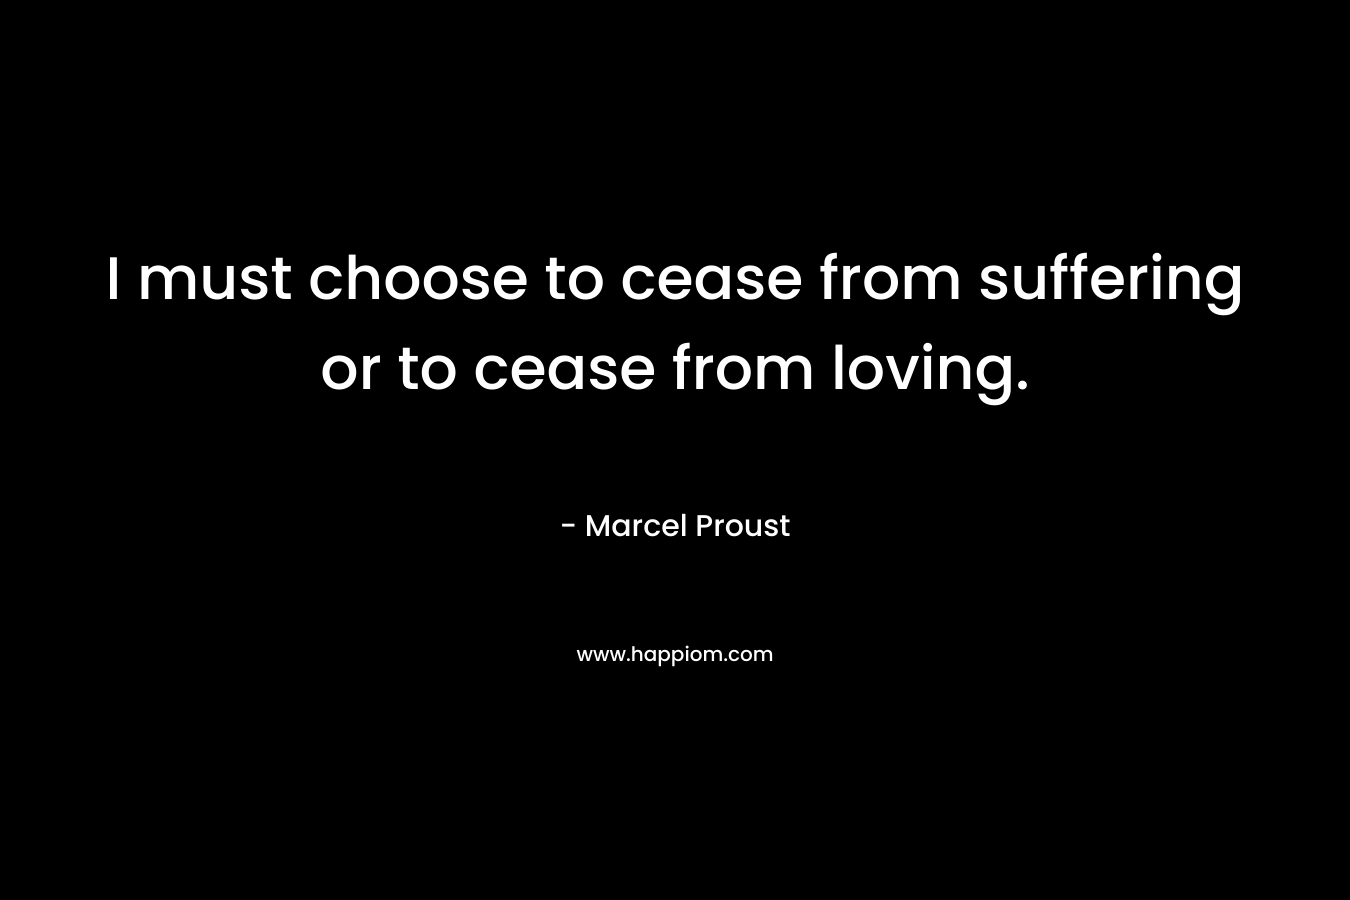 I must choose to cease from suffering or to cease from loving.